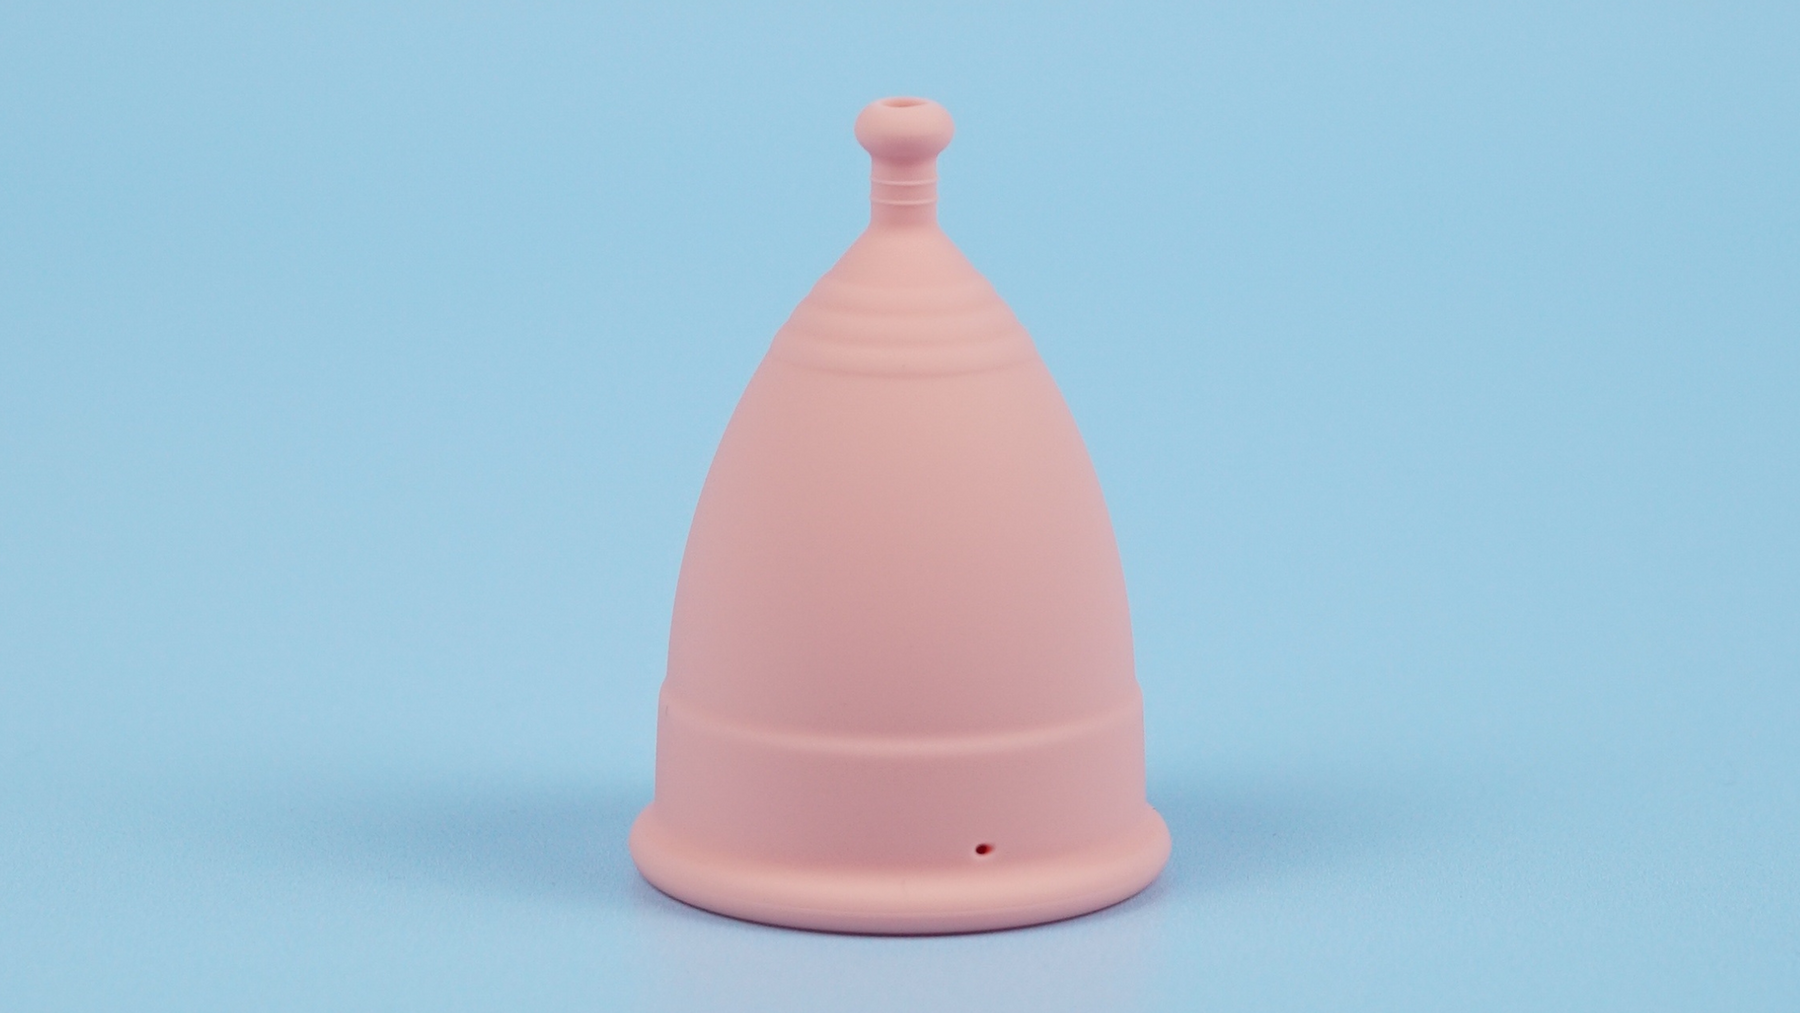 nudie period cup standing on blue backdrop